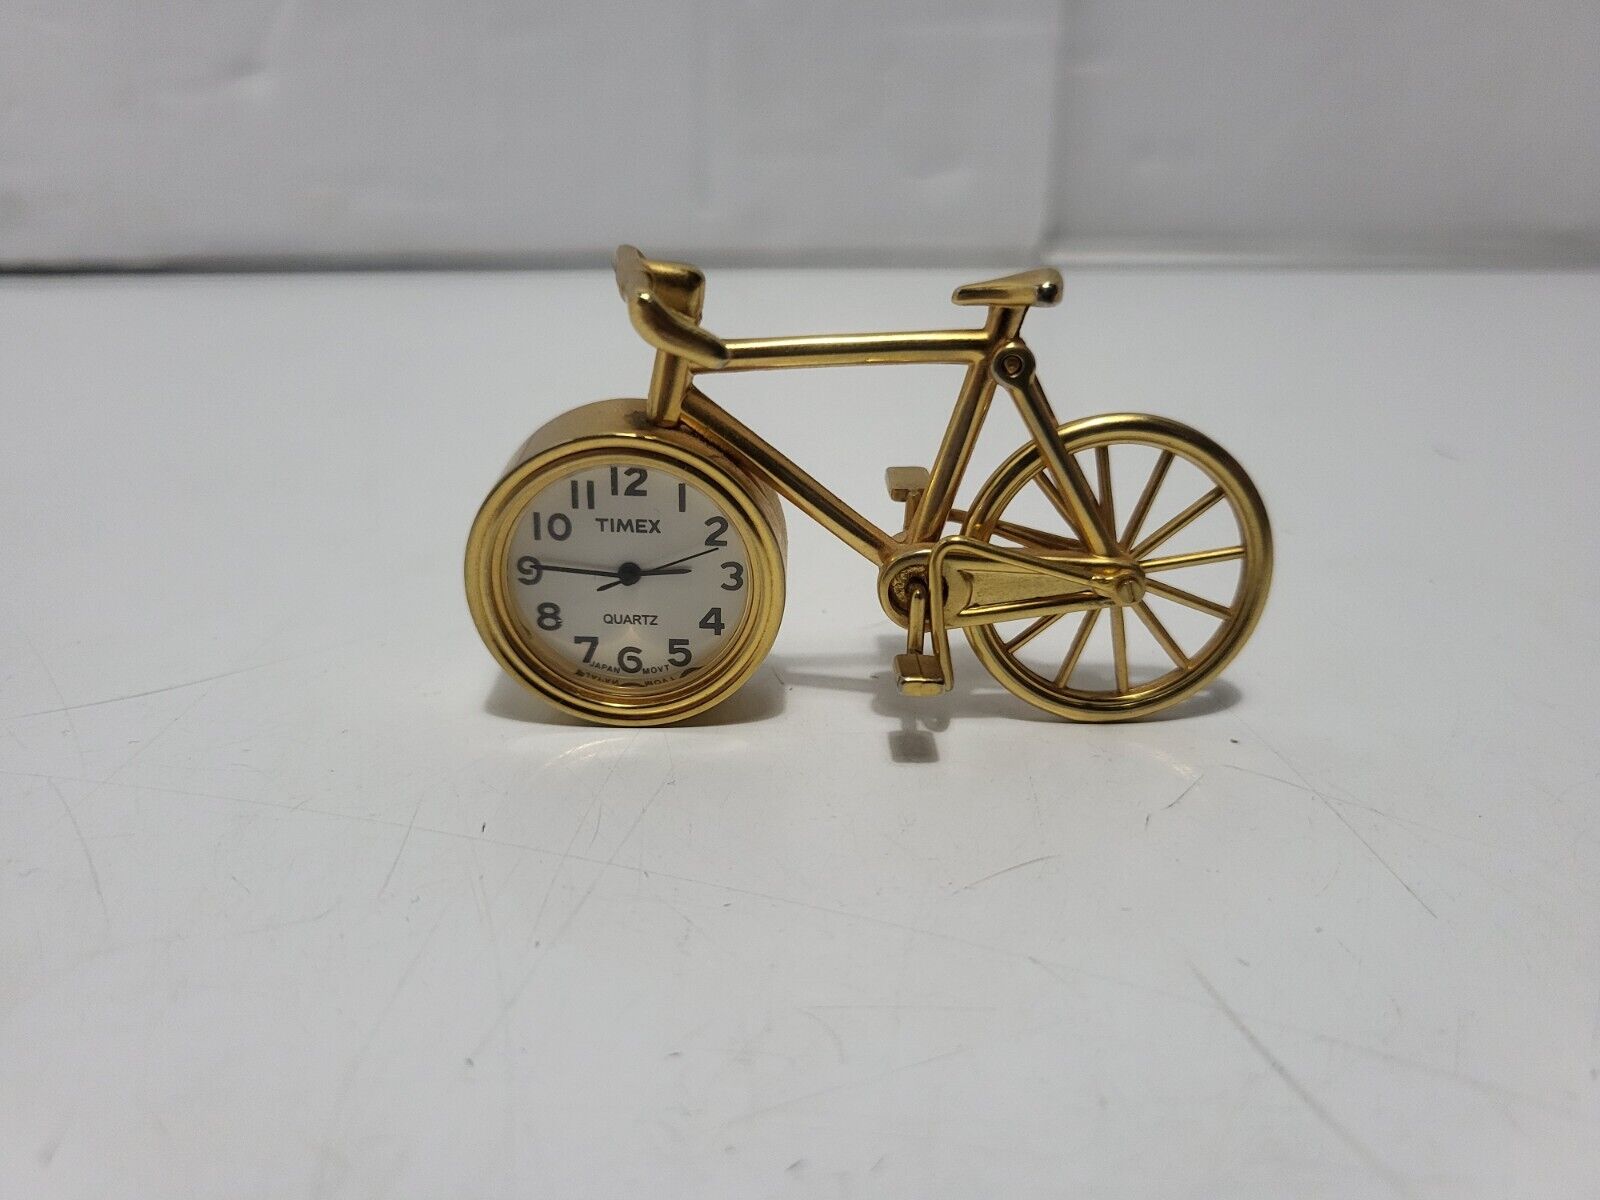 Timex Gold Bicycle Collectible Mini-Clock Watch Novelty Art Deco Vintage